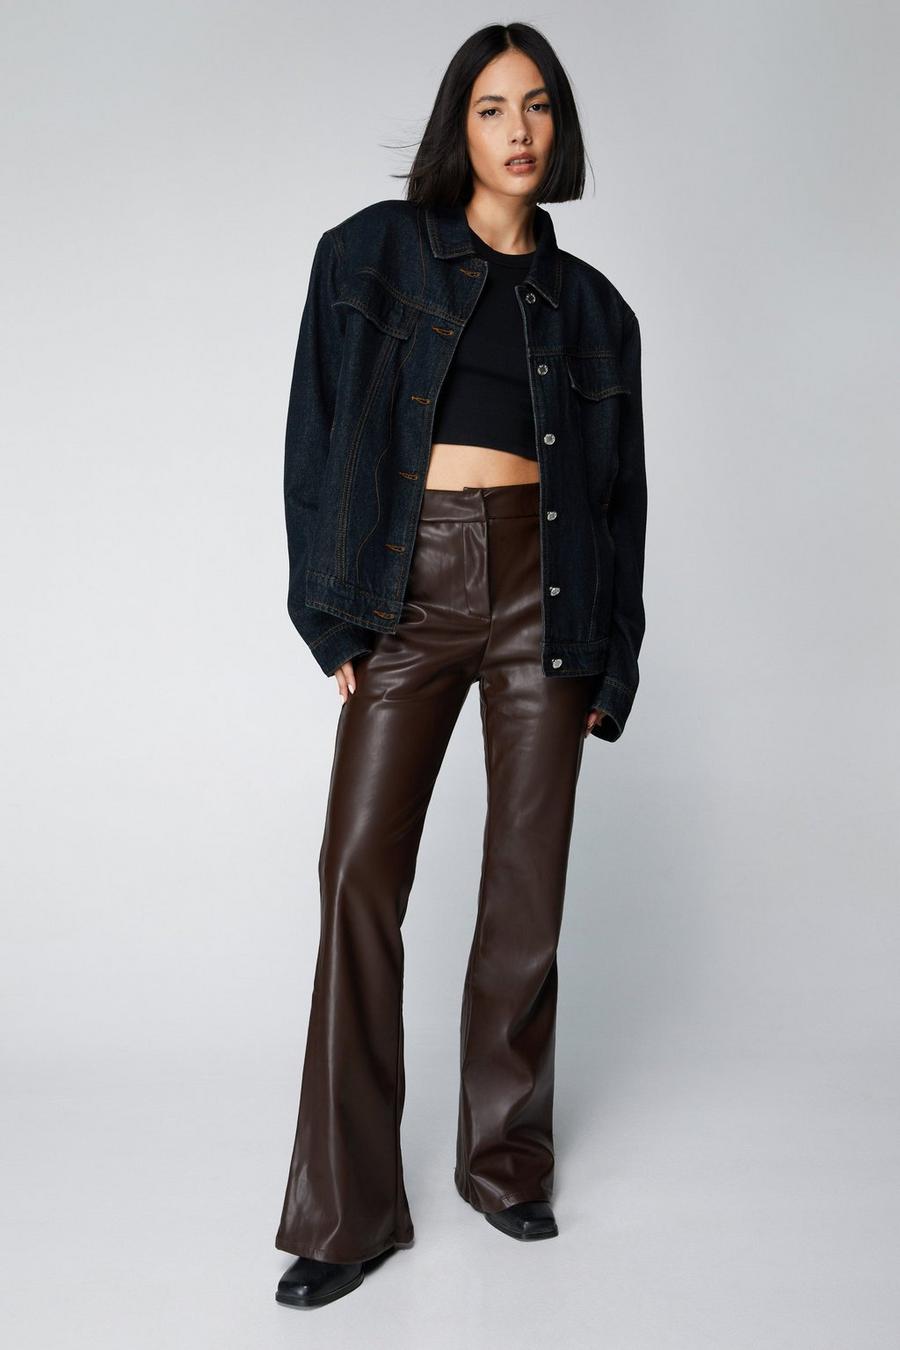 Faux Leather Flares